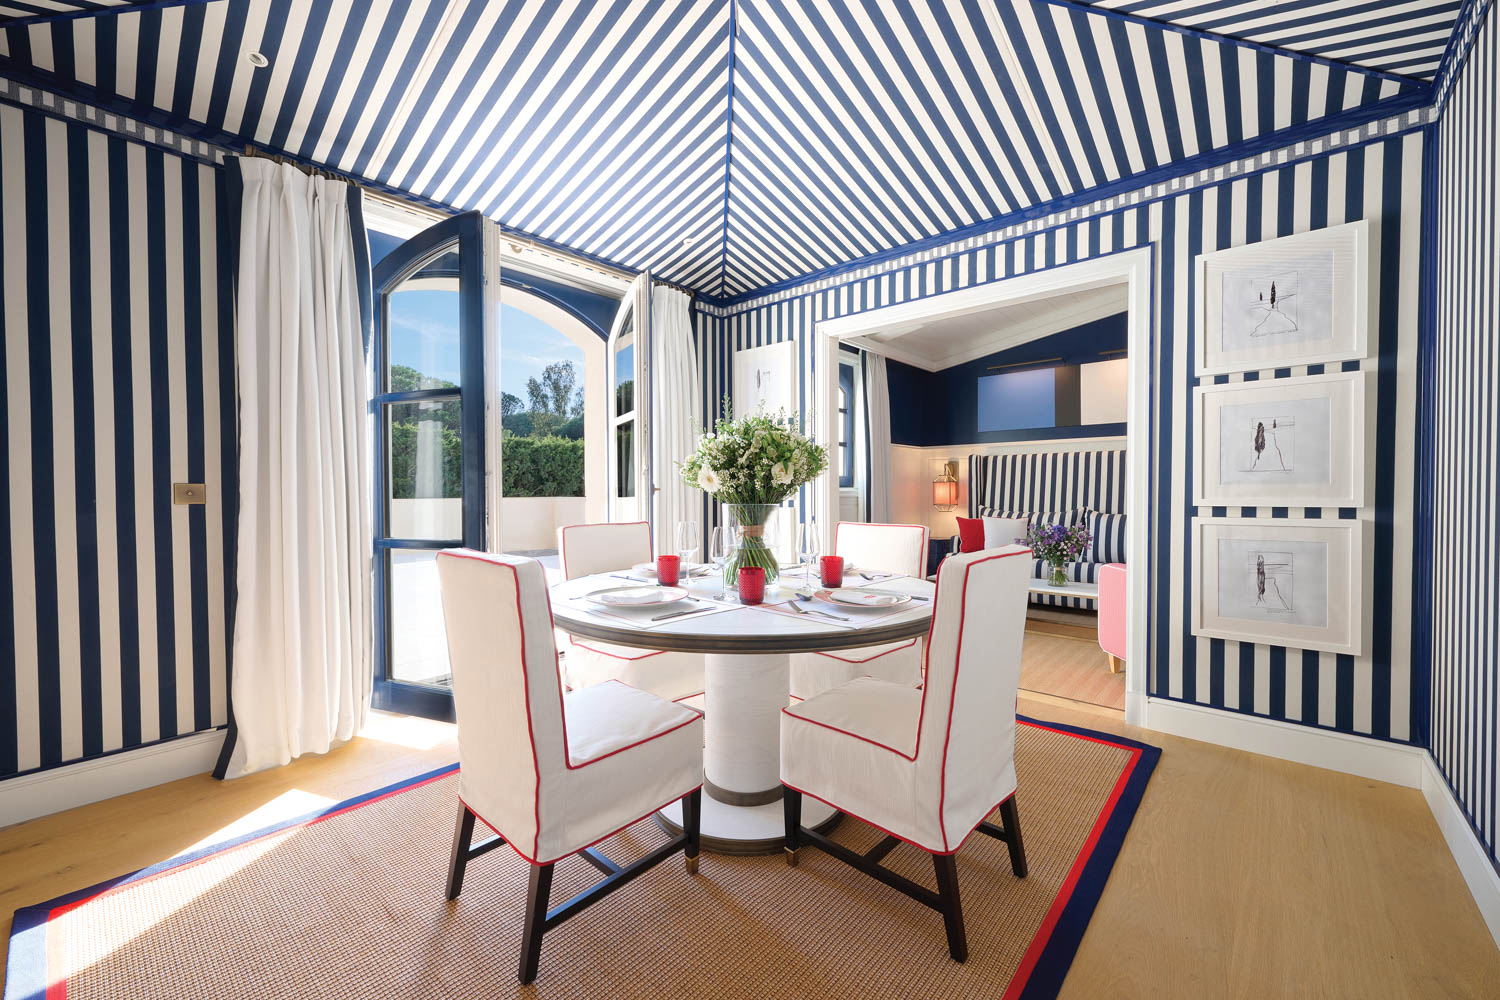 a circular table with white chairs below a striped canopy